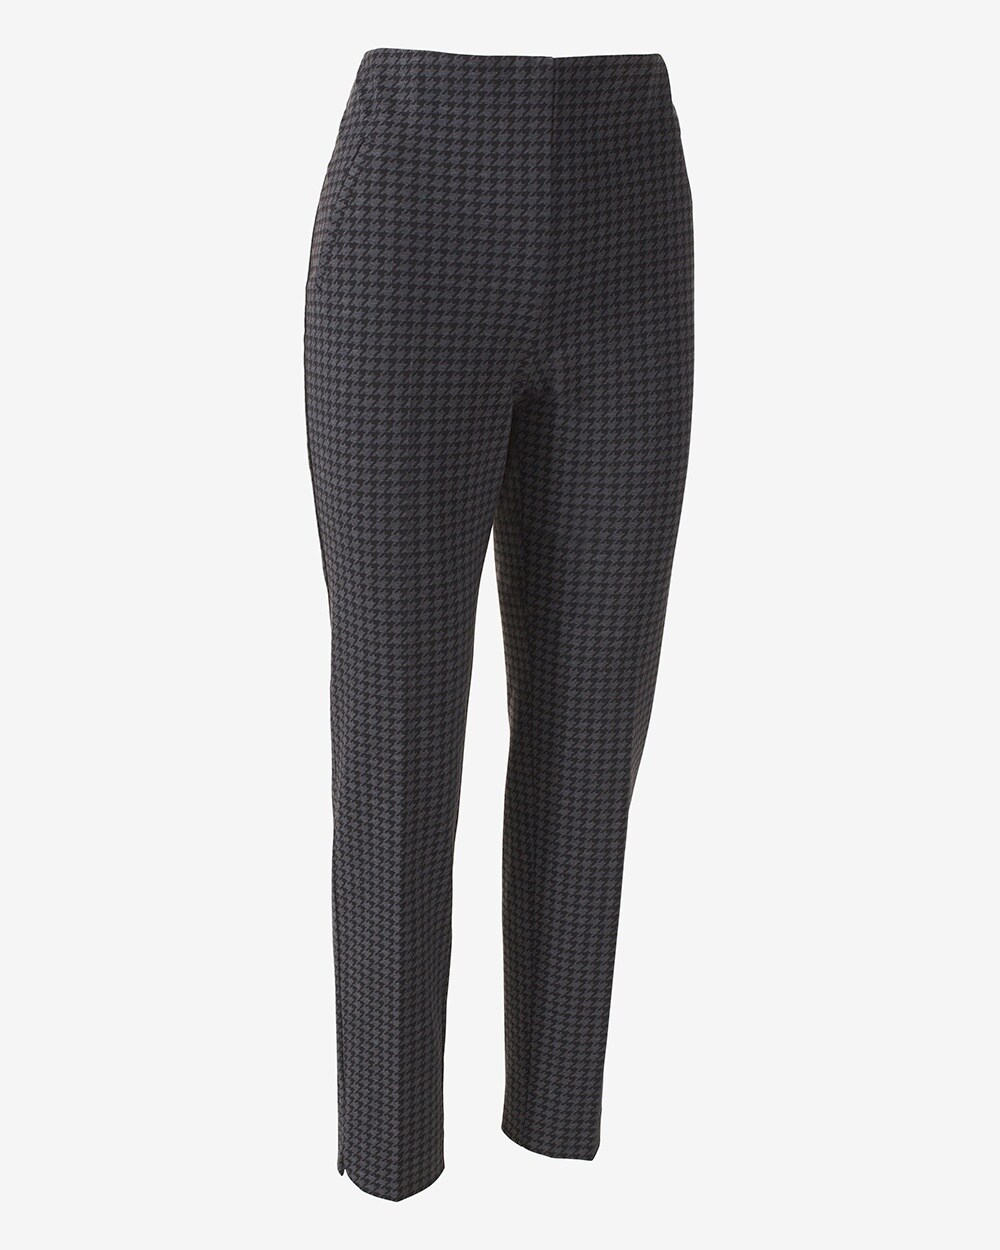 Small Houndstooth Pull-On Pants